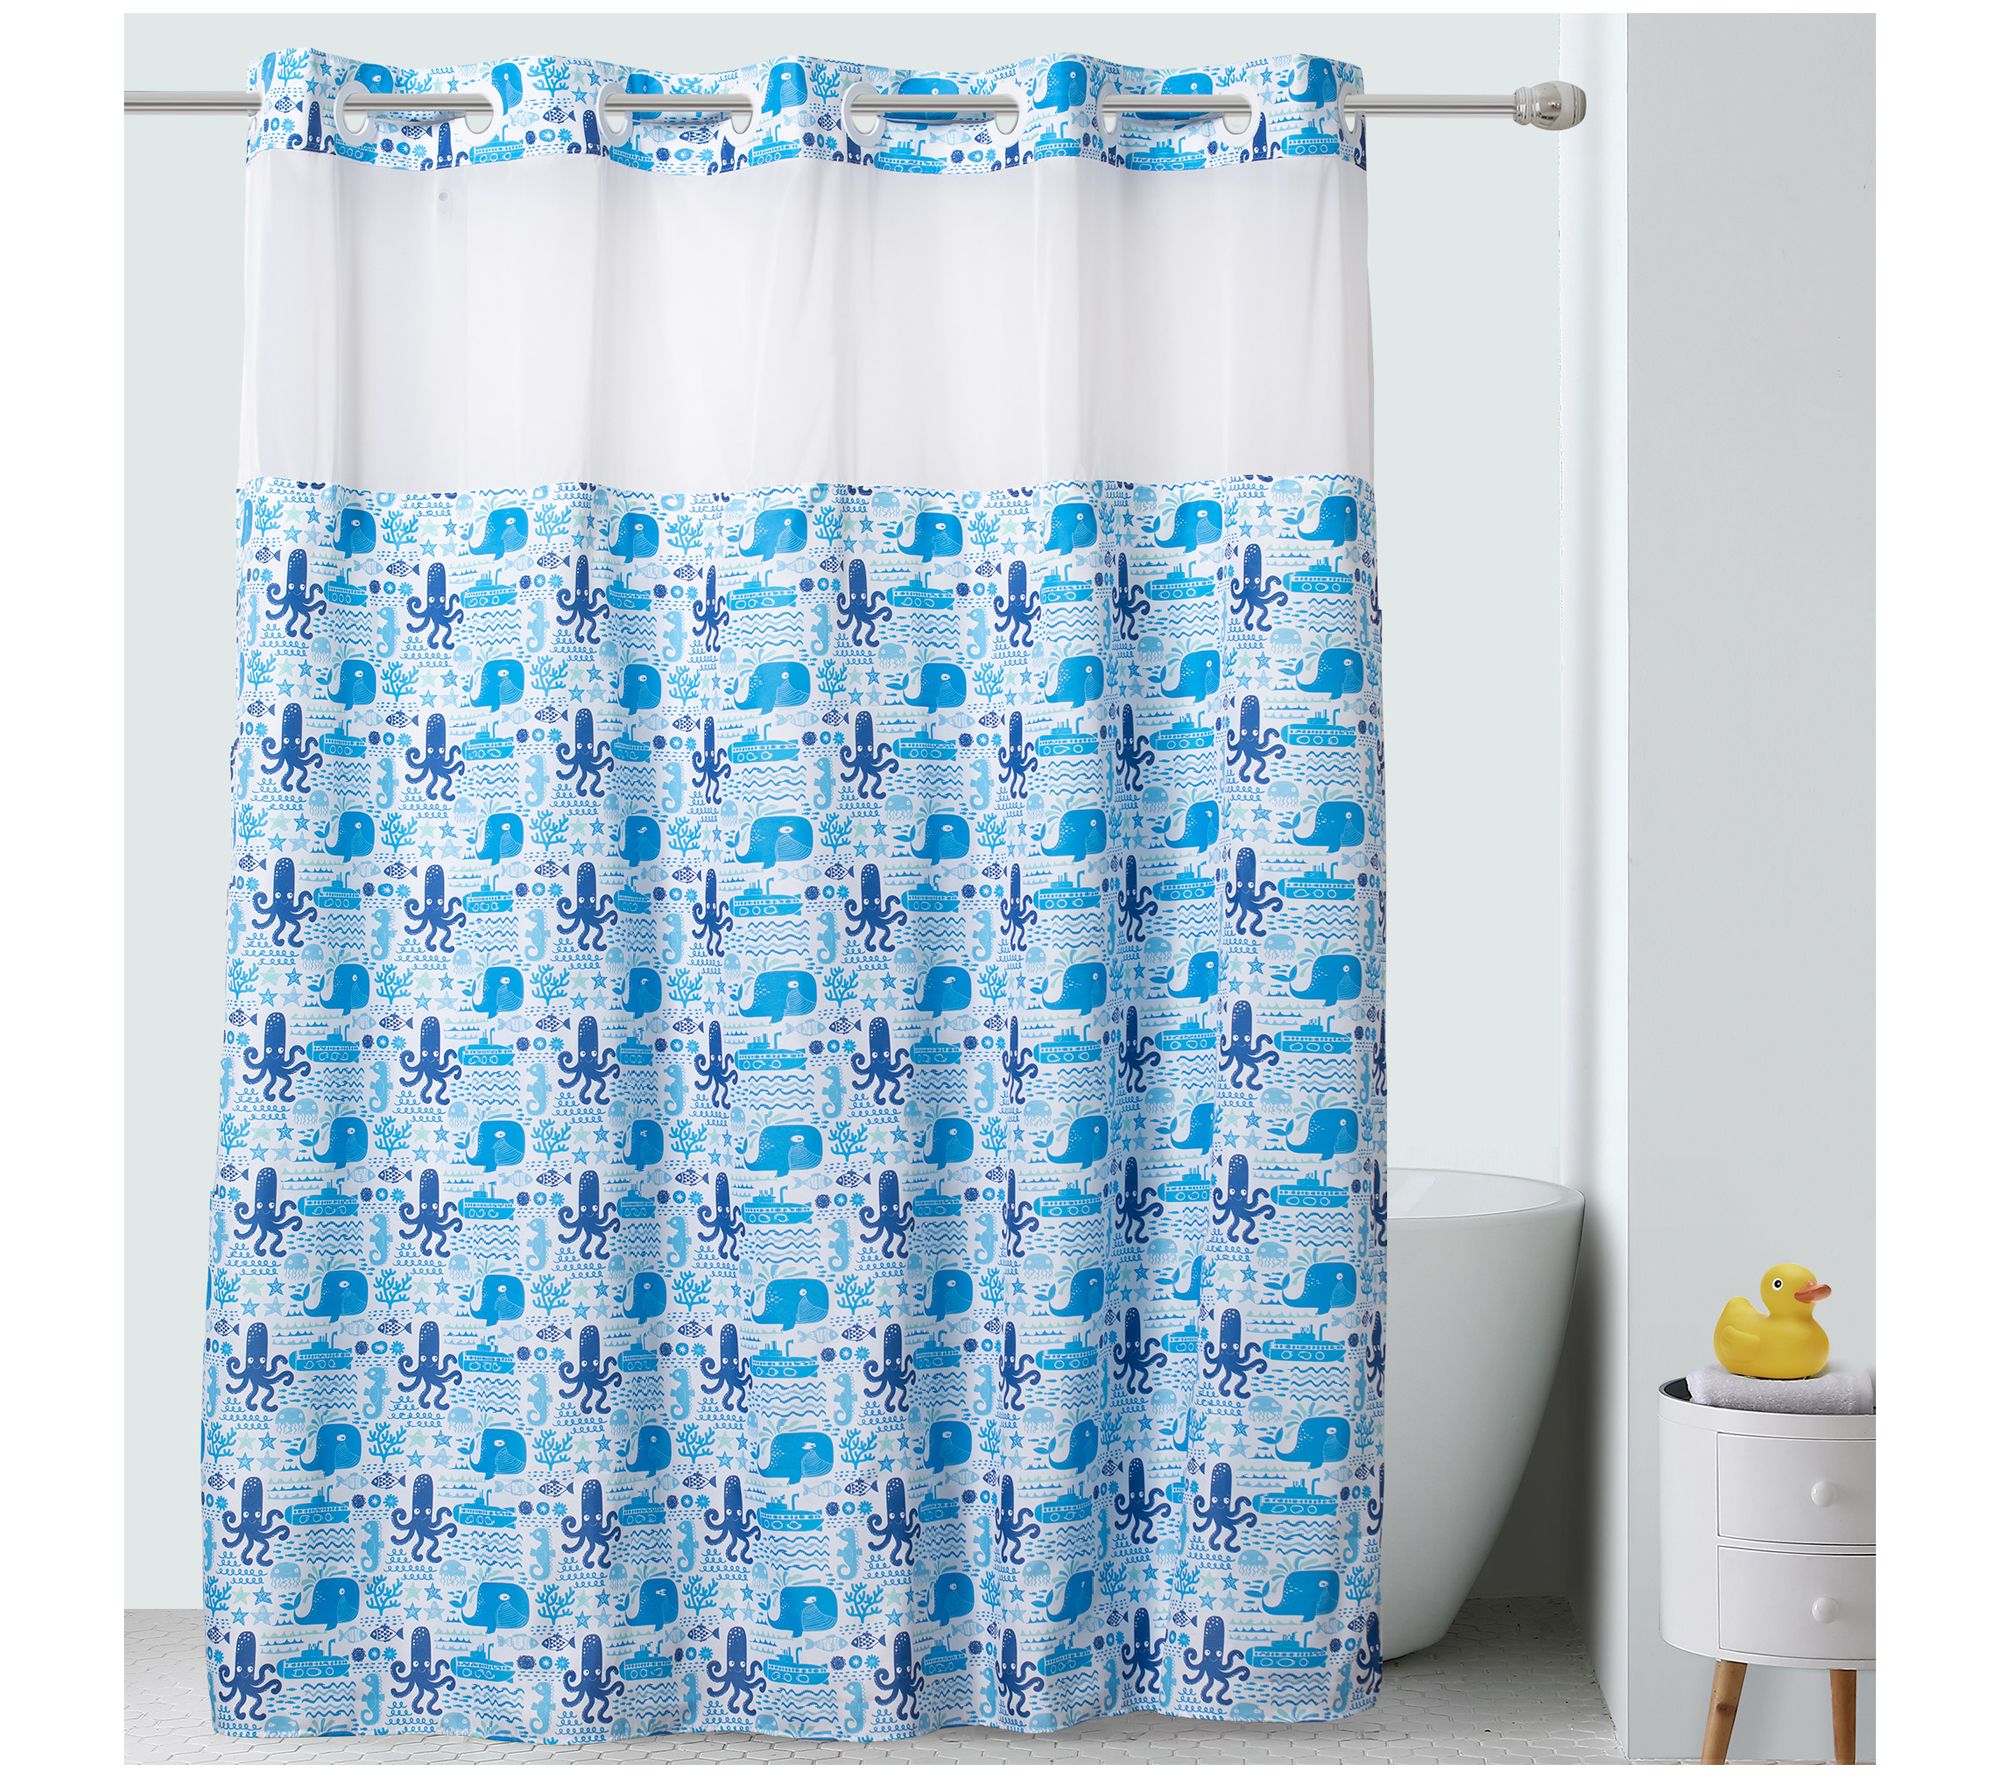 Hookless Shower Curtain For Kids Silly, How To Install Hookless Shower Curtain